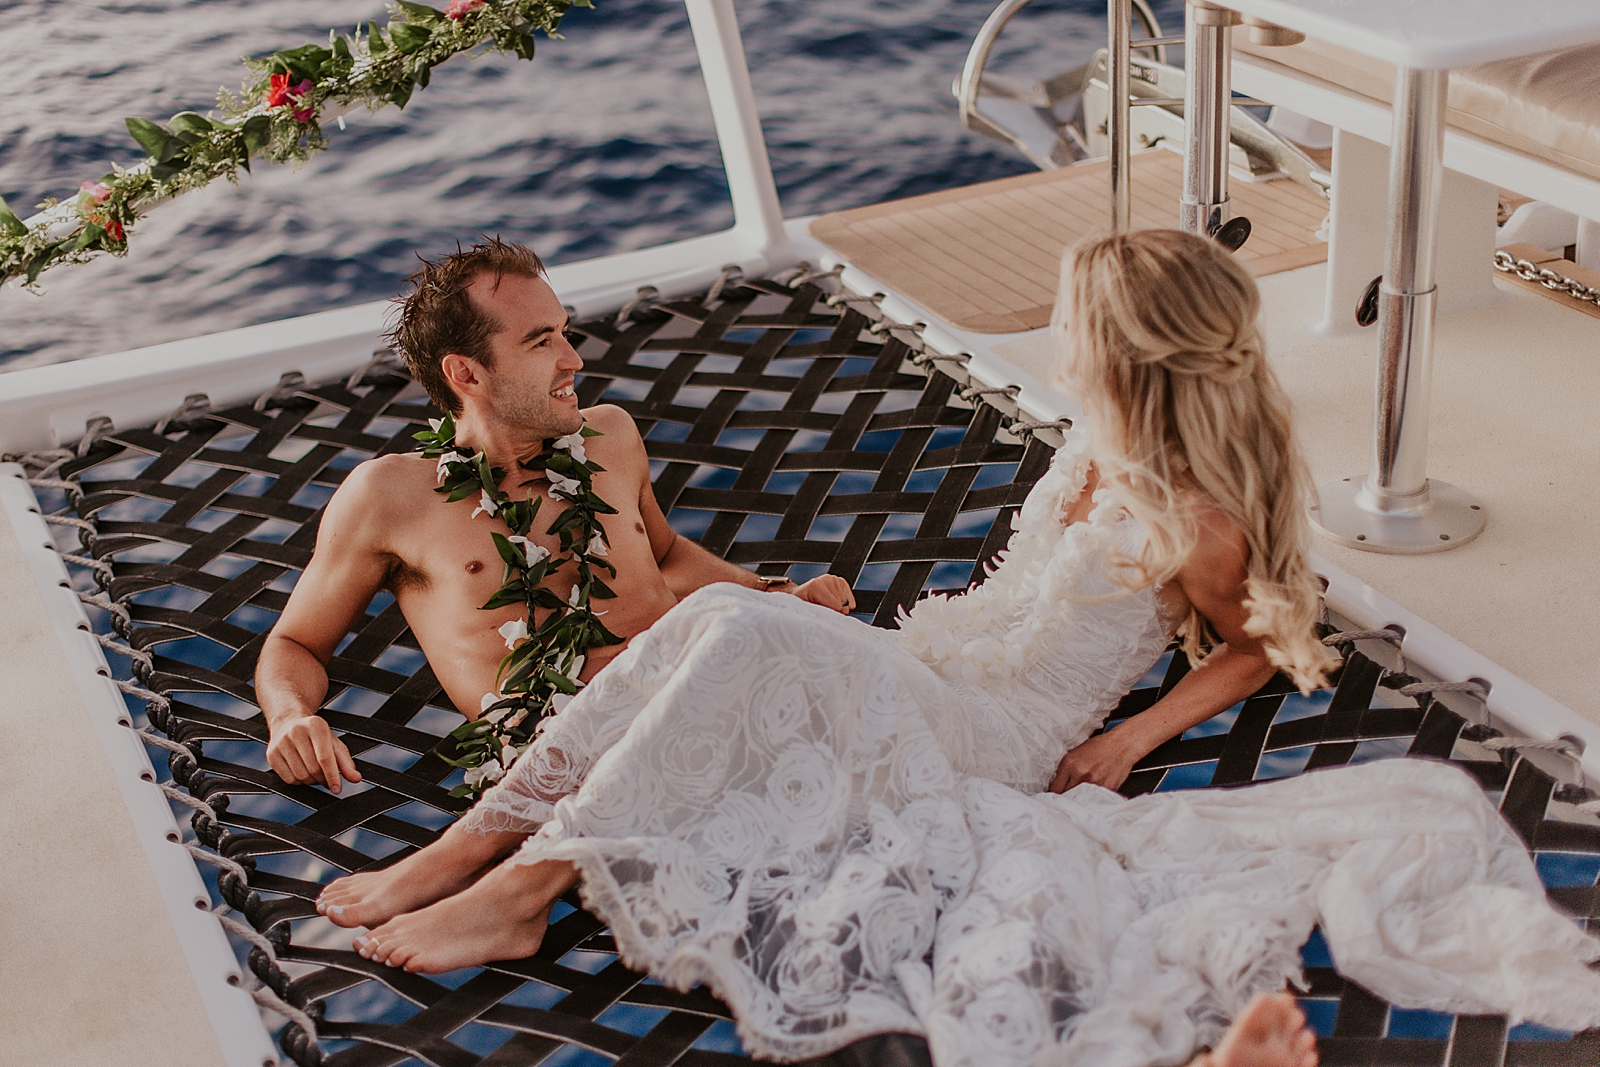 Bride and Groom laying together on canopy floor of the boat